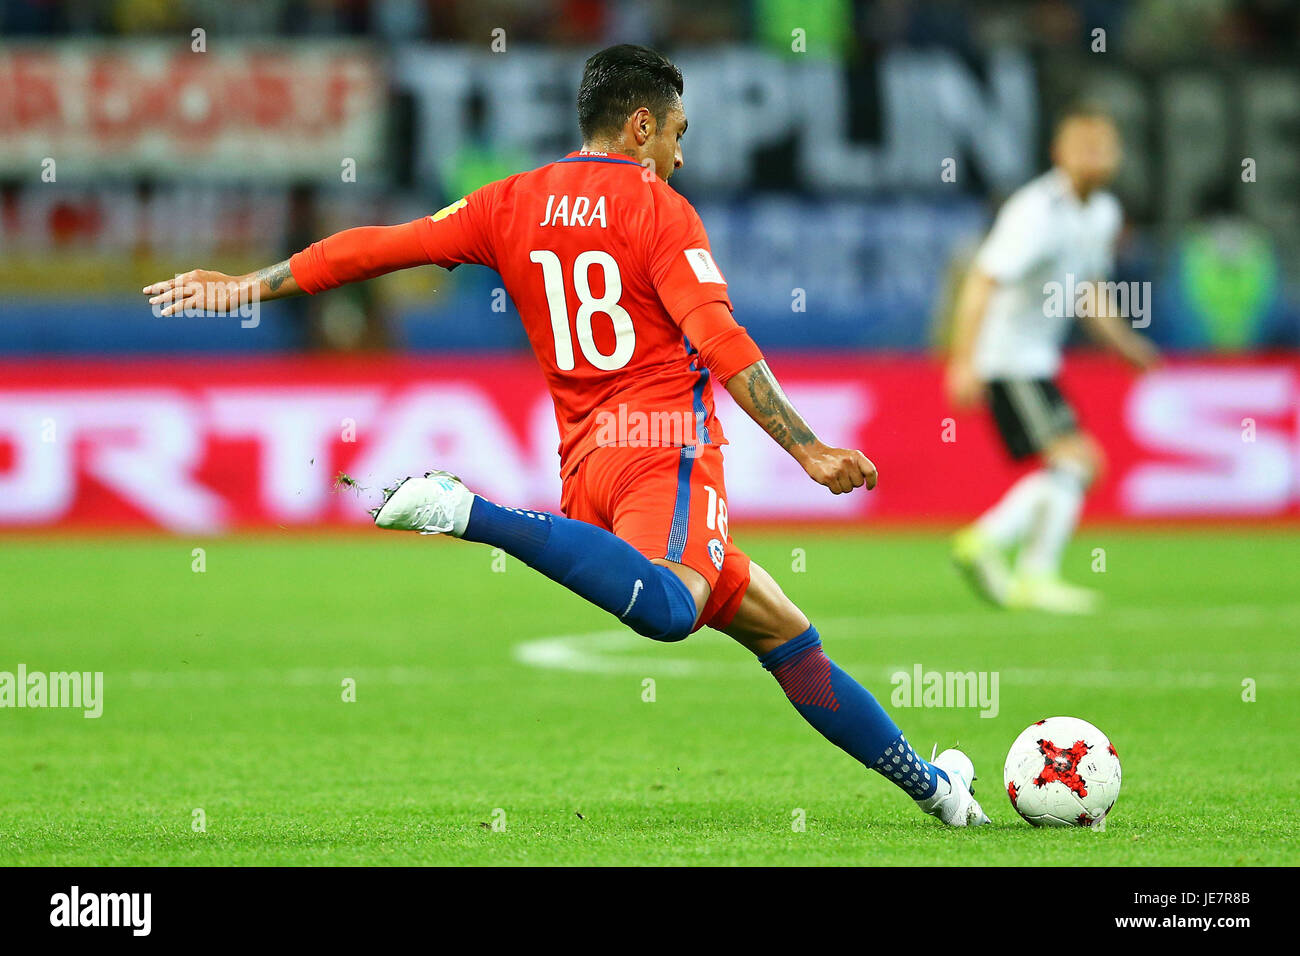 Kazan, Russia. 22nd Jun, 2017. Gonzalo Jara of Chile during a match between Germany and Chile valid for the second round of the Confederations Cup 2017 on Thursday (22) held at the Kazan Arena in Kazan, Russia. Credit: Foto Arena LTDA/Alamy Live News Stock Photo